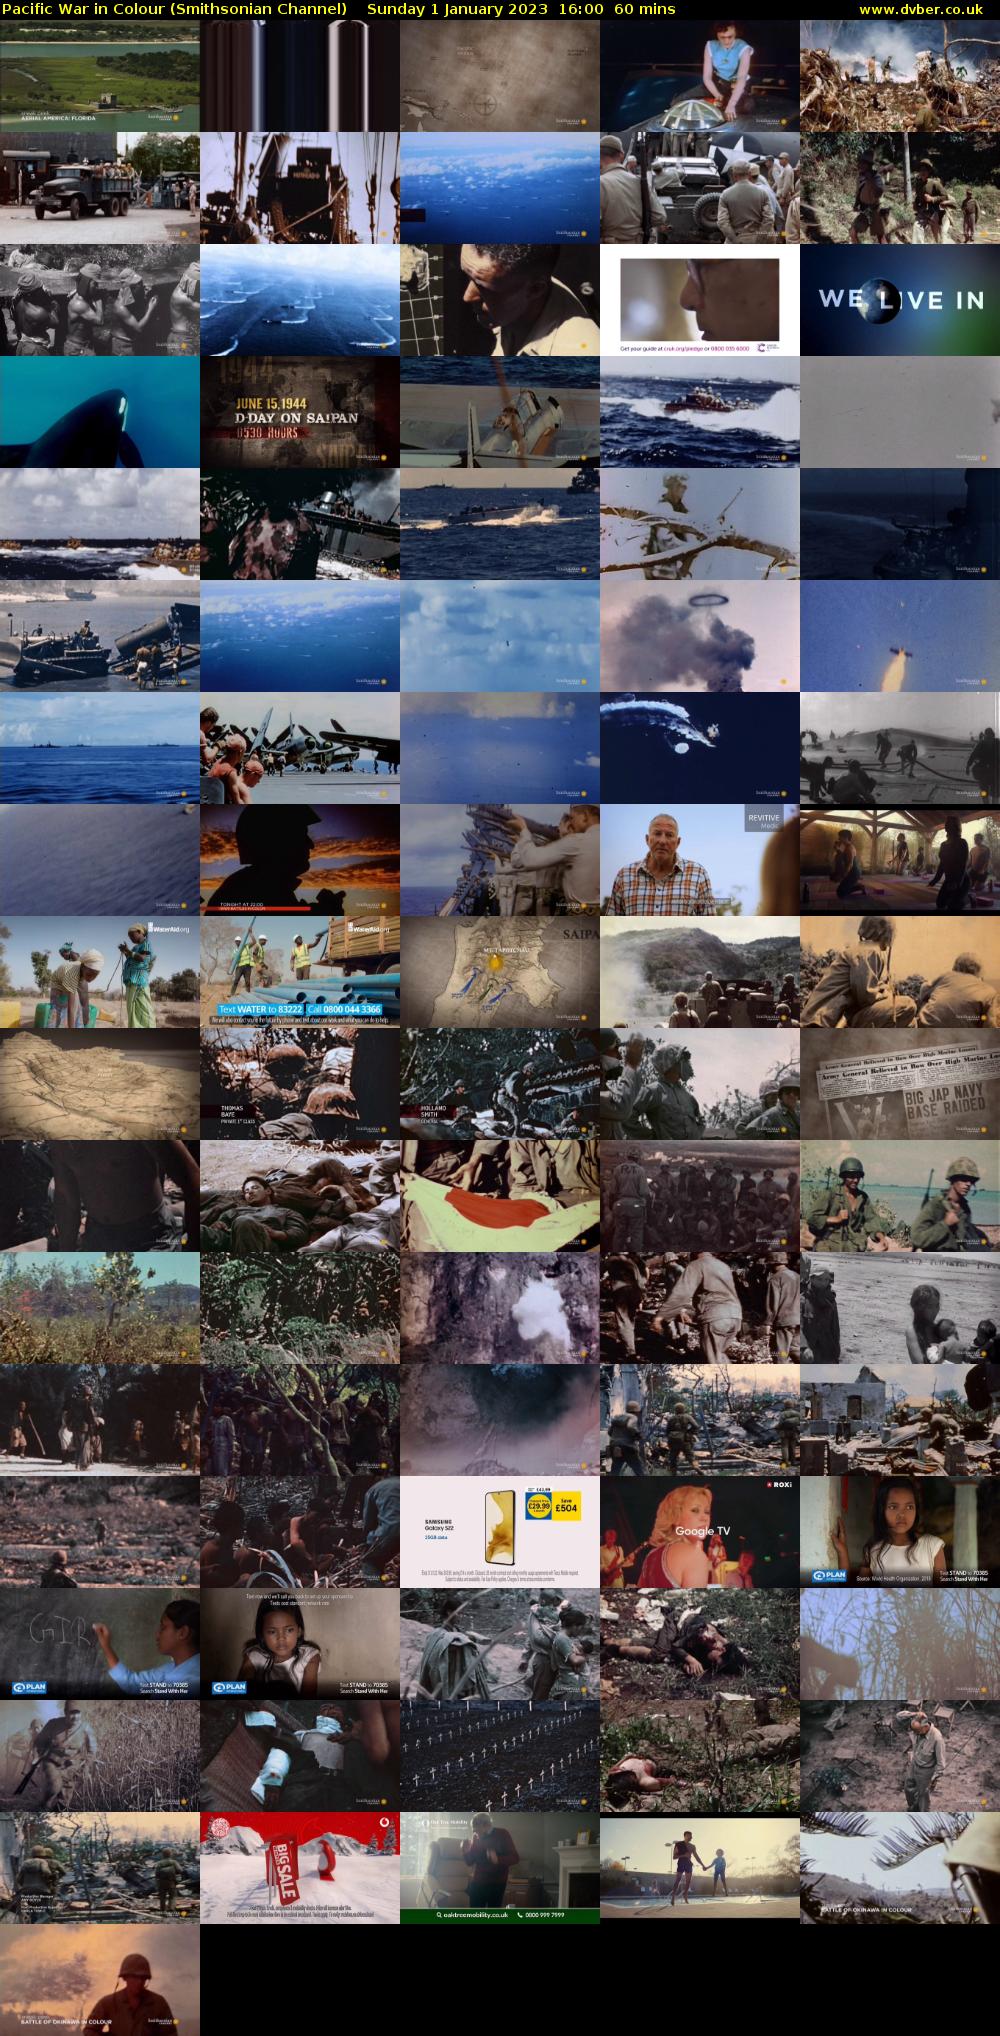 Pacific War in Colour (Smithsonian Channel) Sunday 1 January 2023 16:00 - 17:00